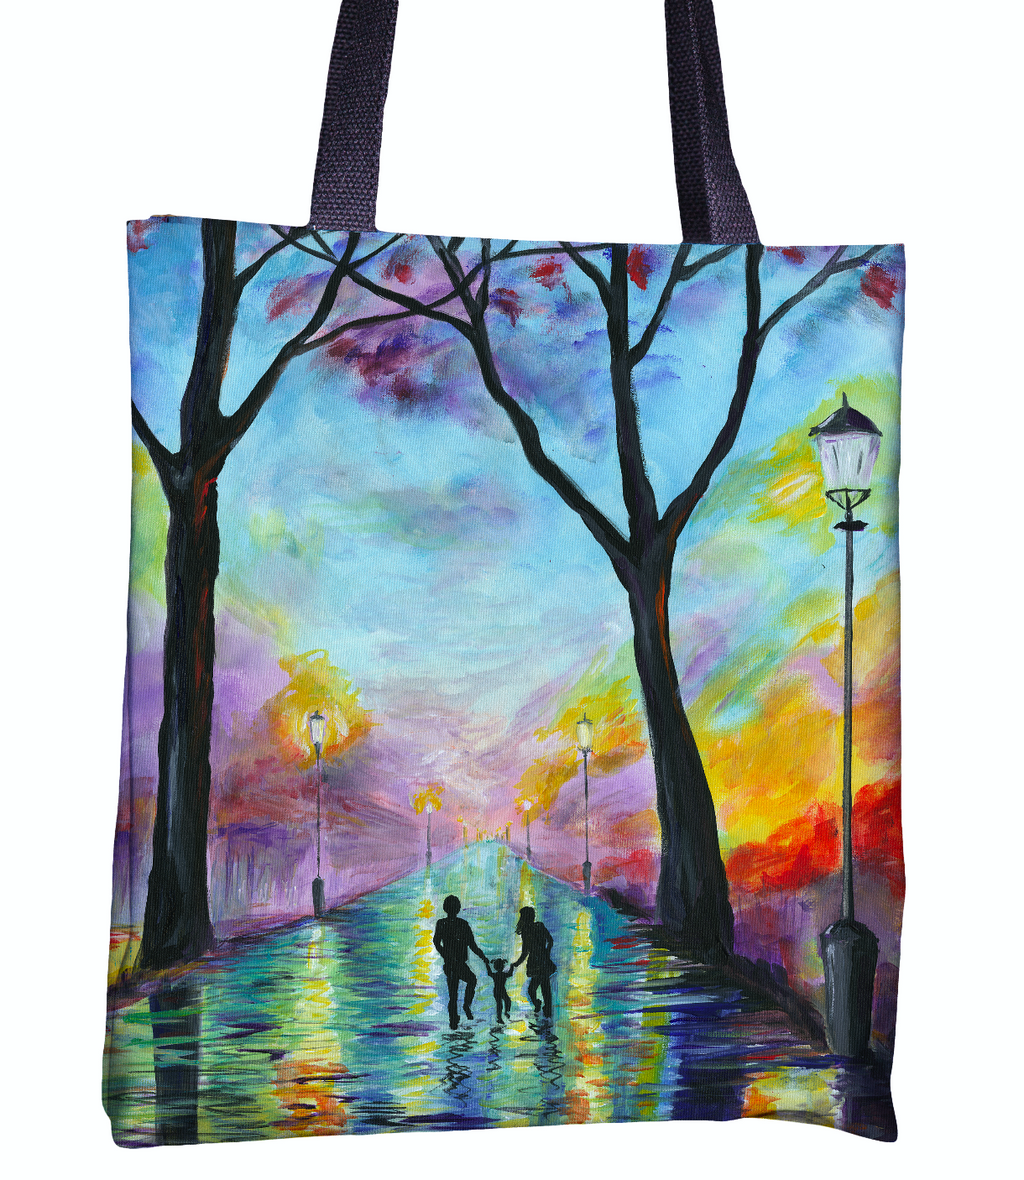 "Lights Of The City" - Tote Bag